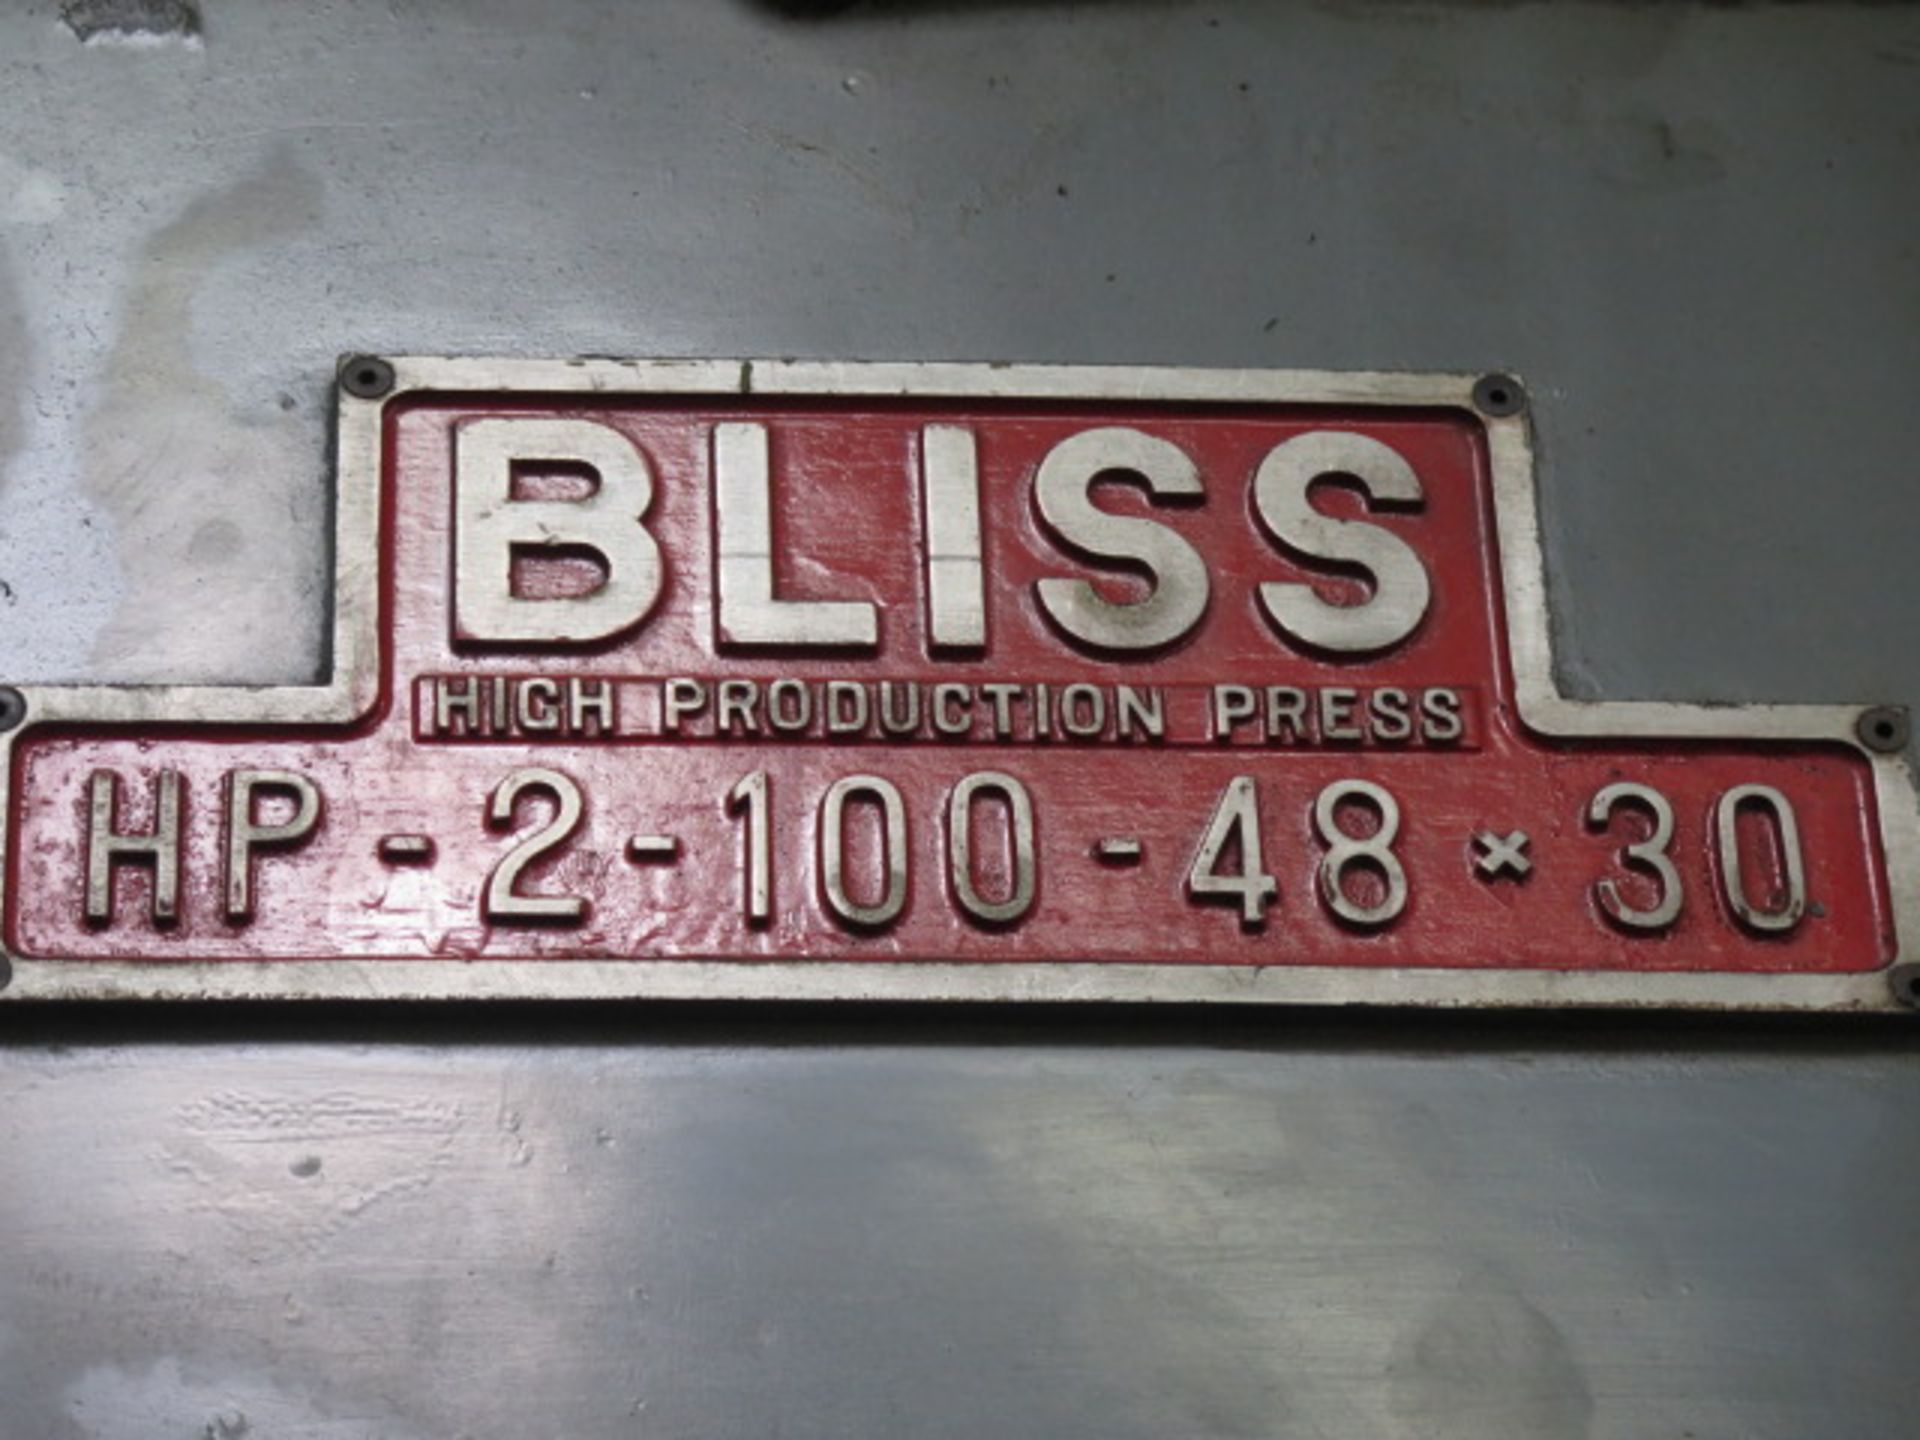 Bliss HP-2-100-48-30 100-Ton High Production Straight Side Stamping Press s/n H51055-HP3829 w/ WPC - Image 11 of 11